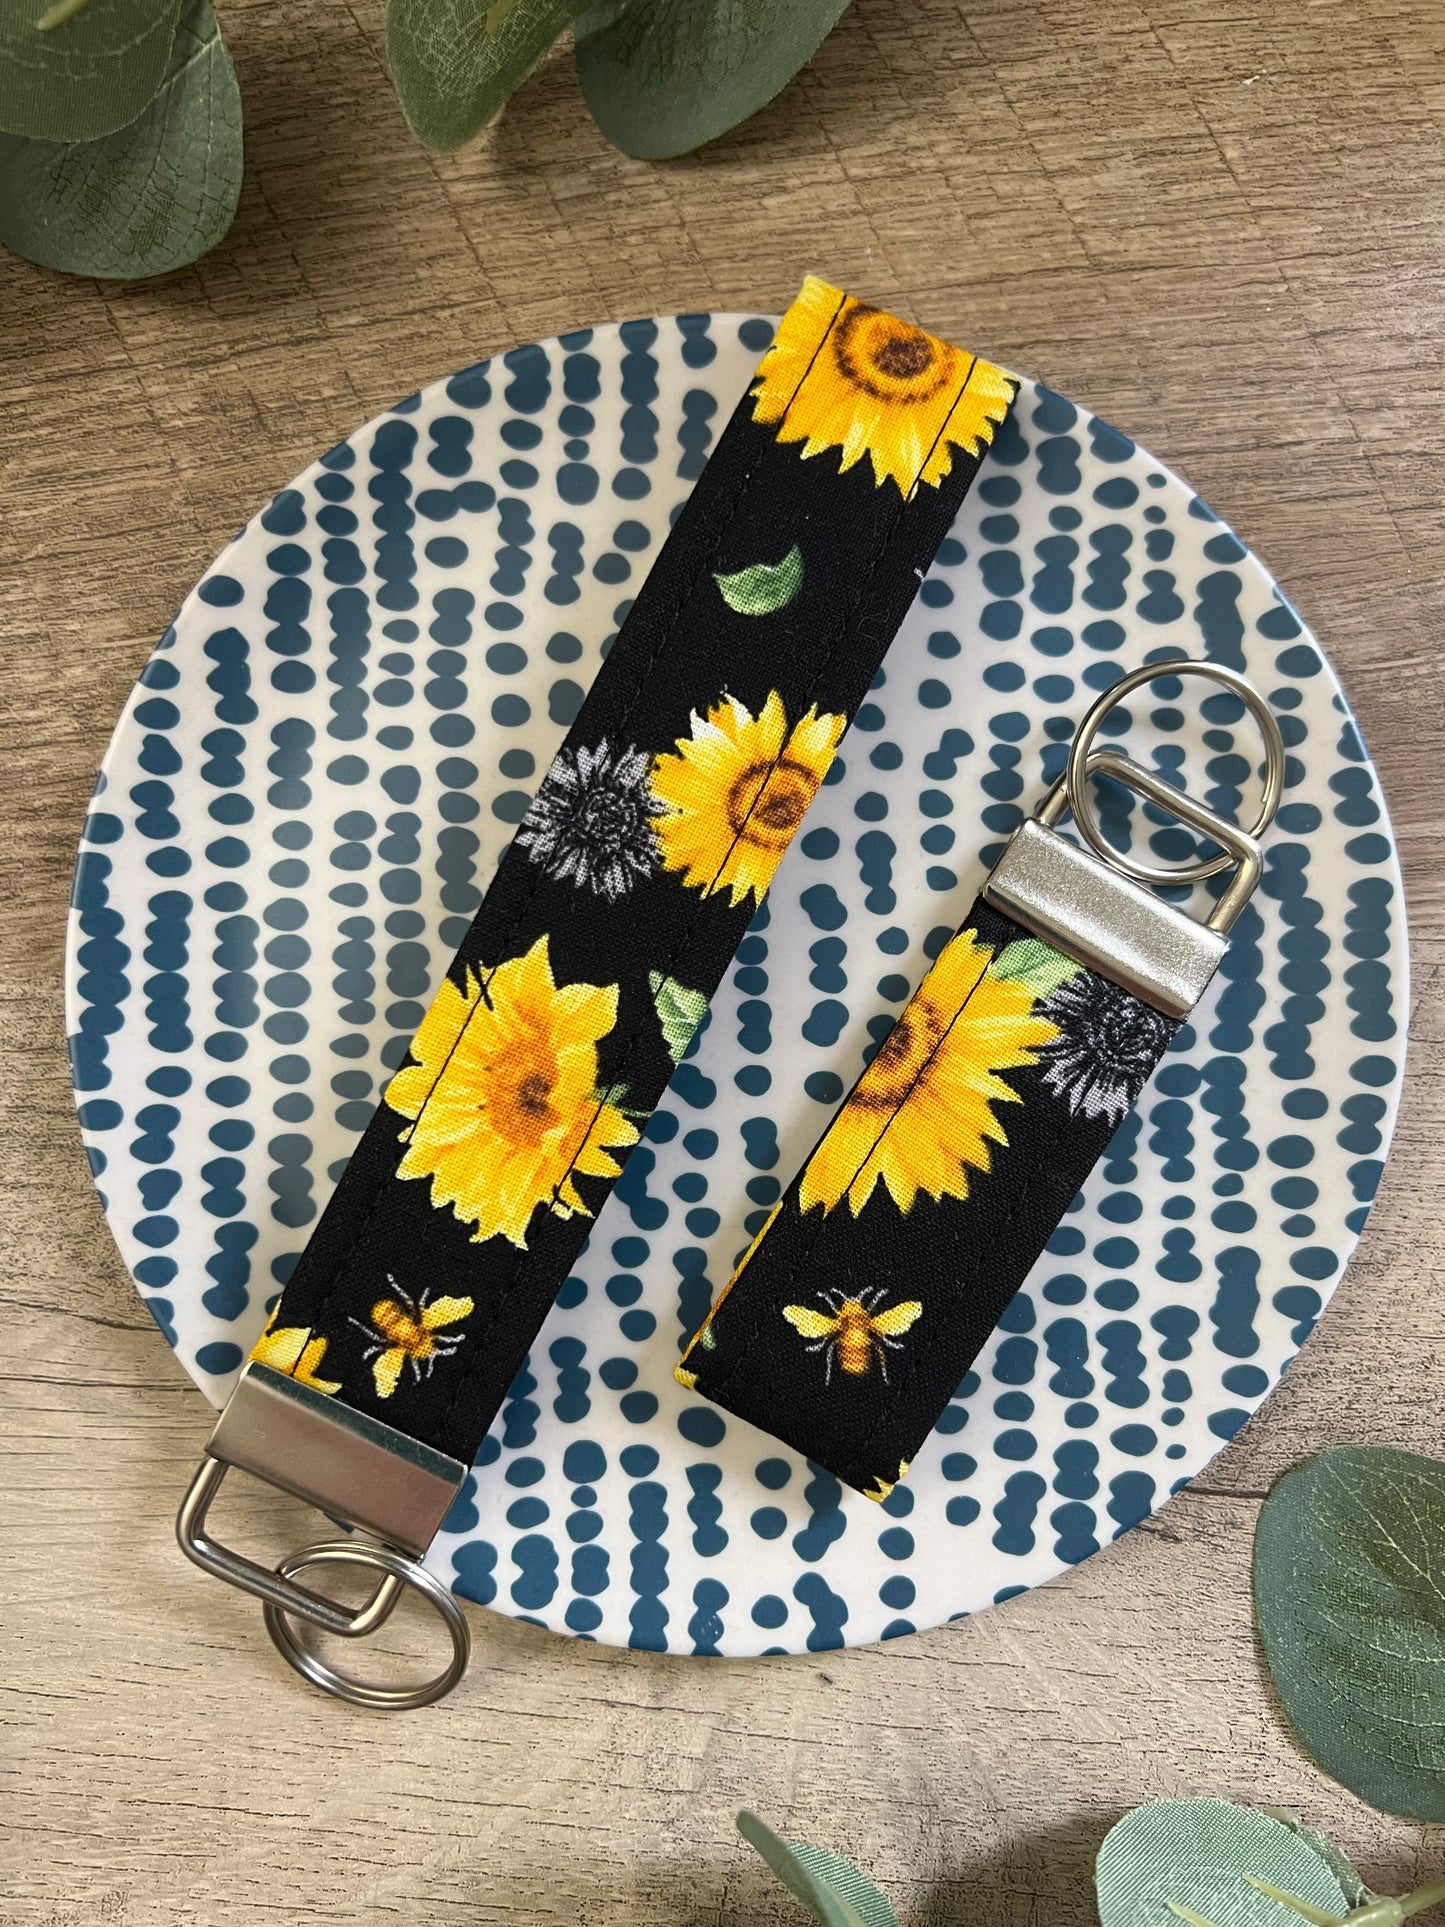 Sunflower & Bees Cotton Key Fob - Wristlet and Mini Option - 1” Wide